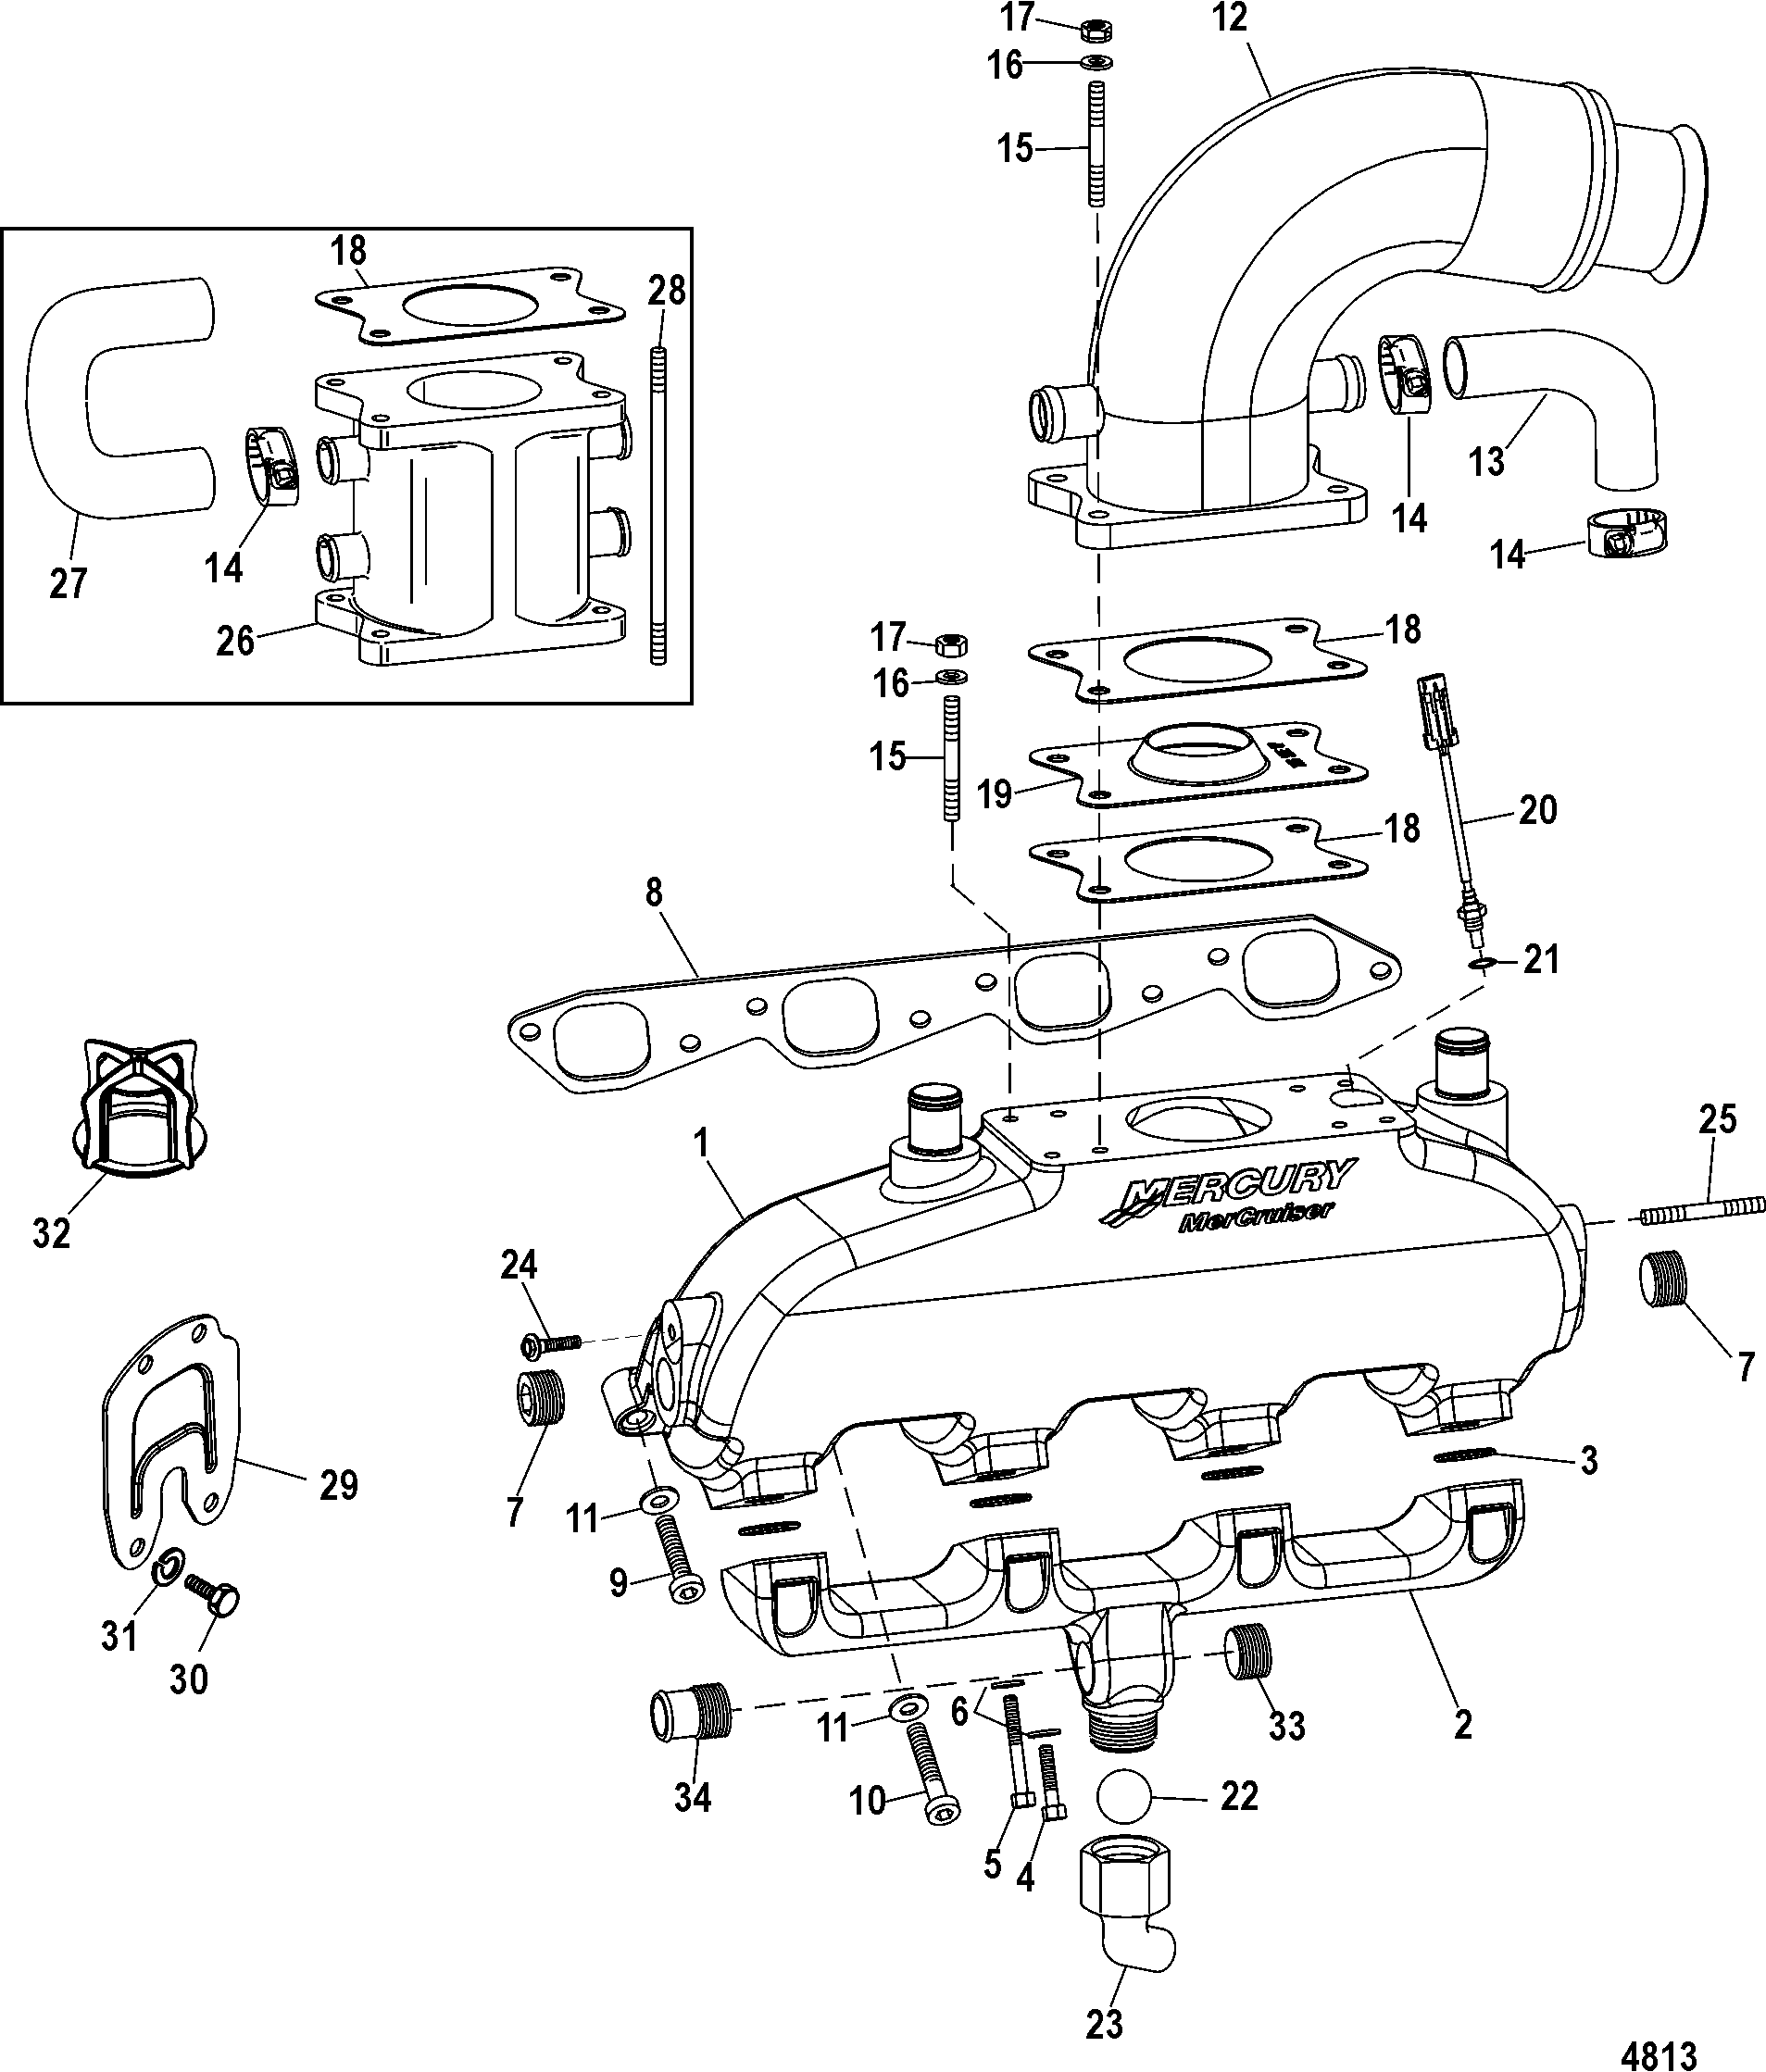 EXHAUST MANIFOLD(W/ WATER RAIL), ELBOW, AND RISER